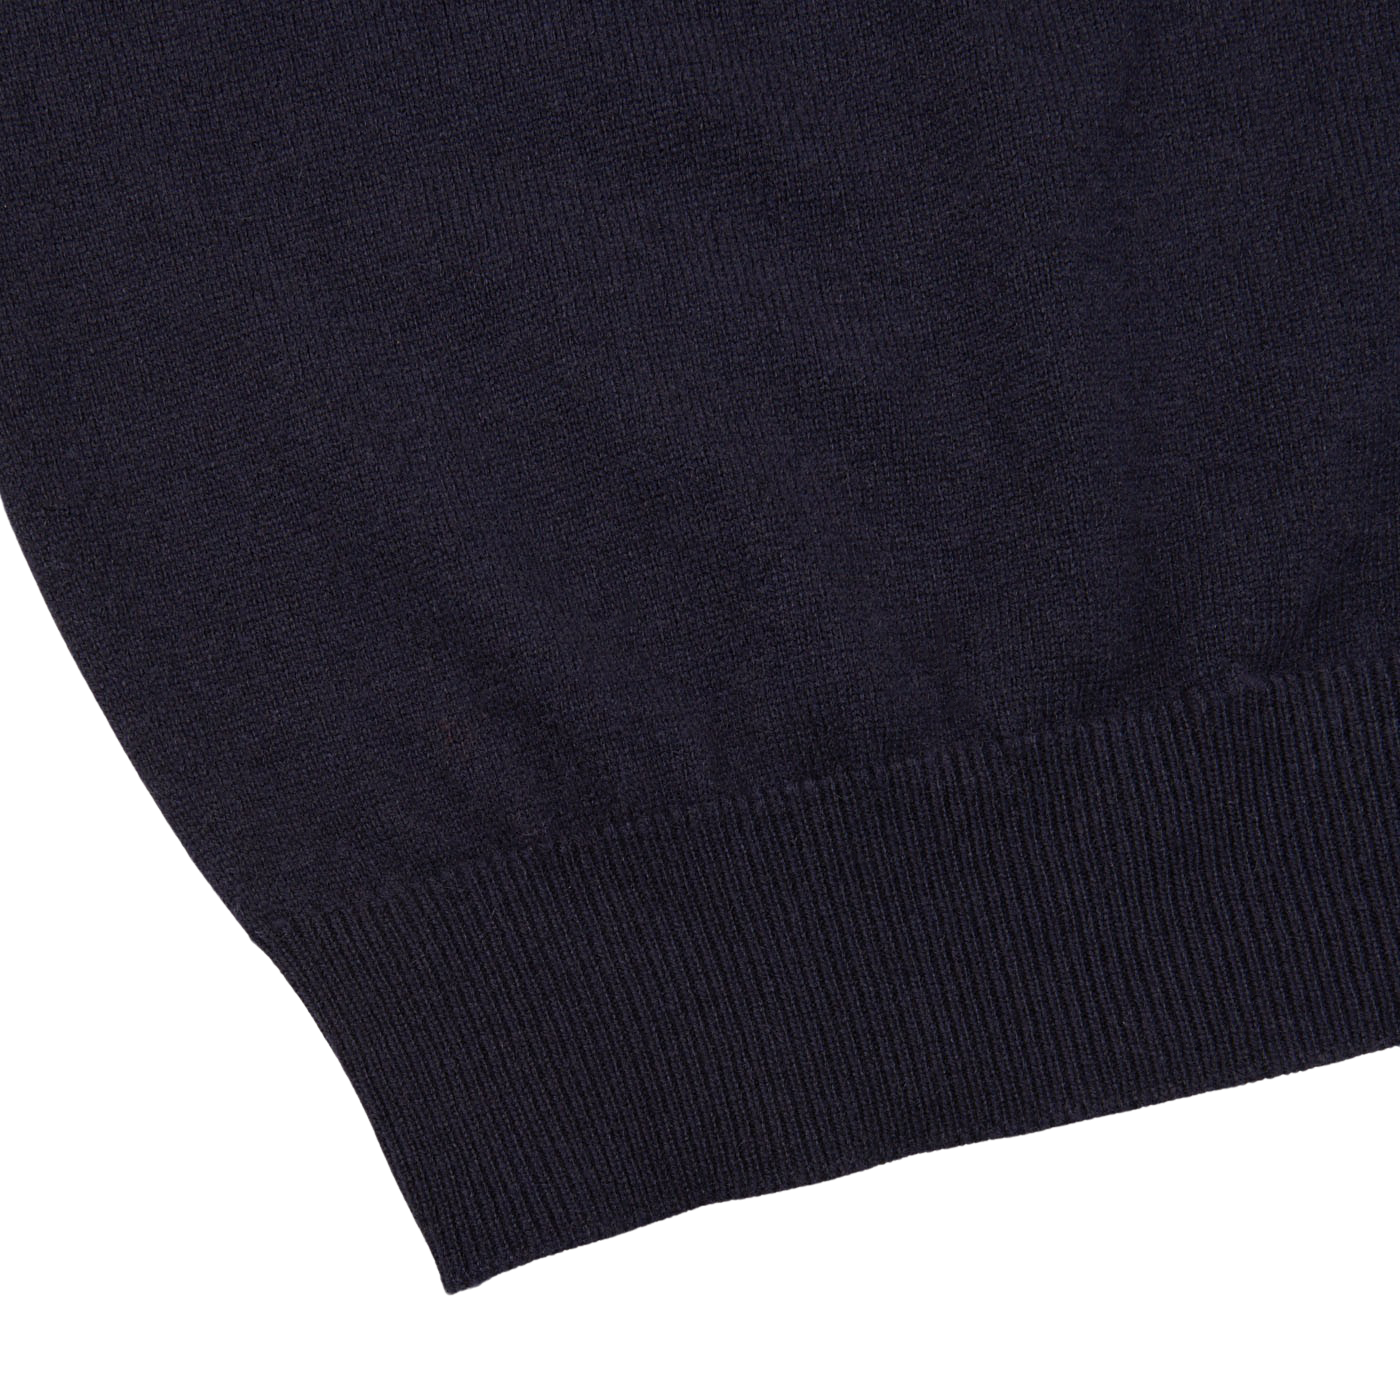 A close up of the neck of a William Lockie Navy Crew Neck Cashmere Sweater.